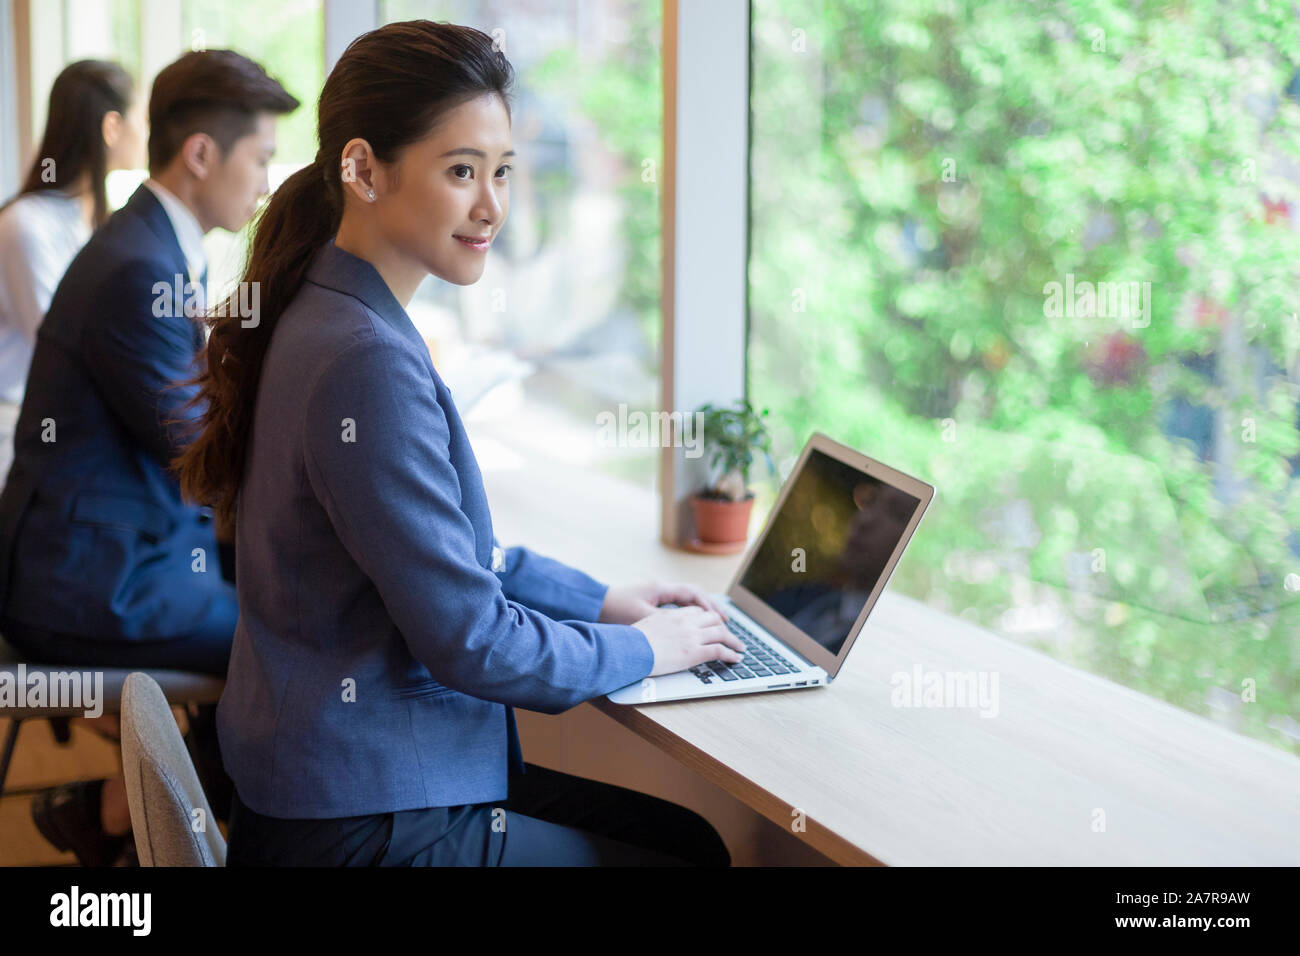 Side view shot of a smiling young businesswoman with a black ponytail using a laptop at a desk in an office Stock Photo